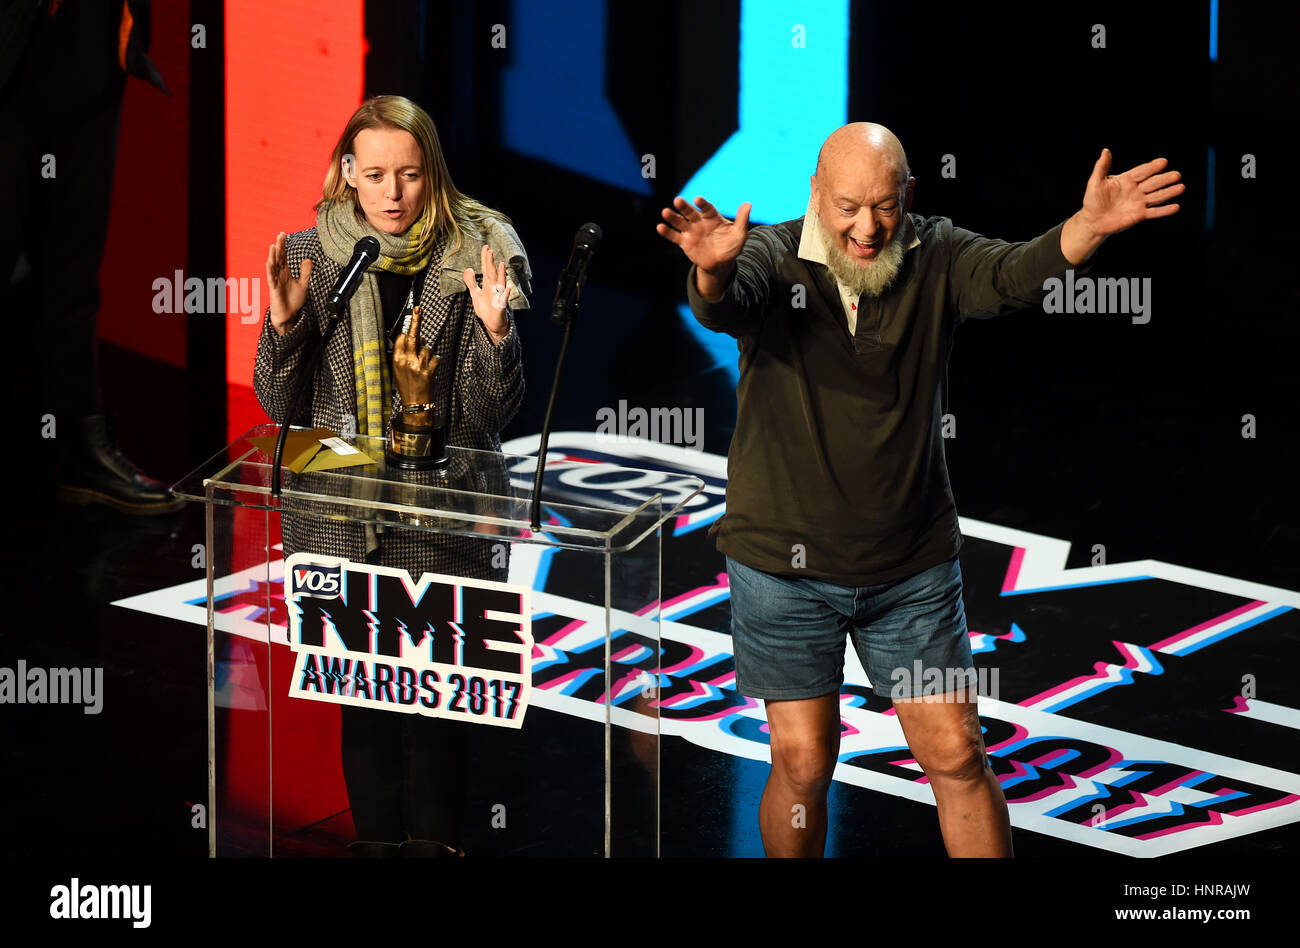 Michael Eavis and Elily Eavis collect Glastonbury's award for Best Festival during the VO5 NME Awards 2017 held at the O2 Brixton Academy, London. Stock Photo